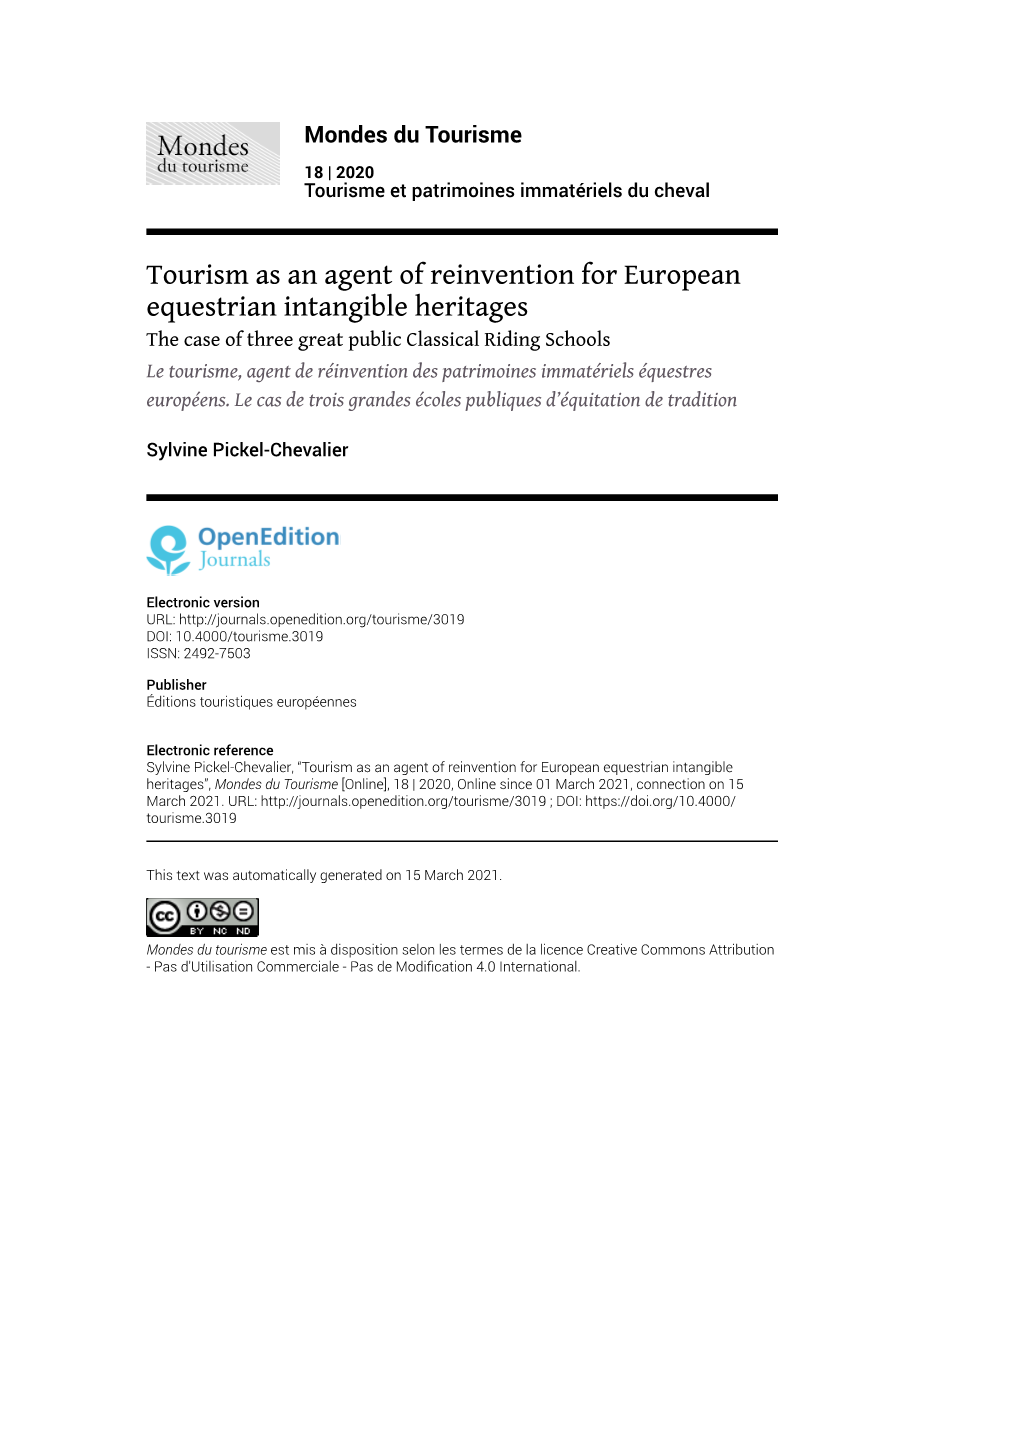 Mondes Du Tourisme, 18 | 2020 Tourism As an Agent of Reinvention for European Equestrian Intangible Heritages 2